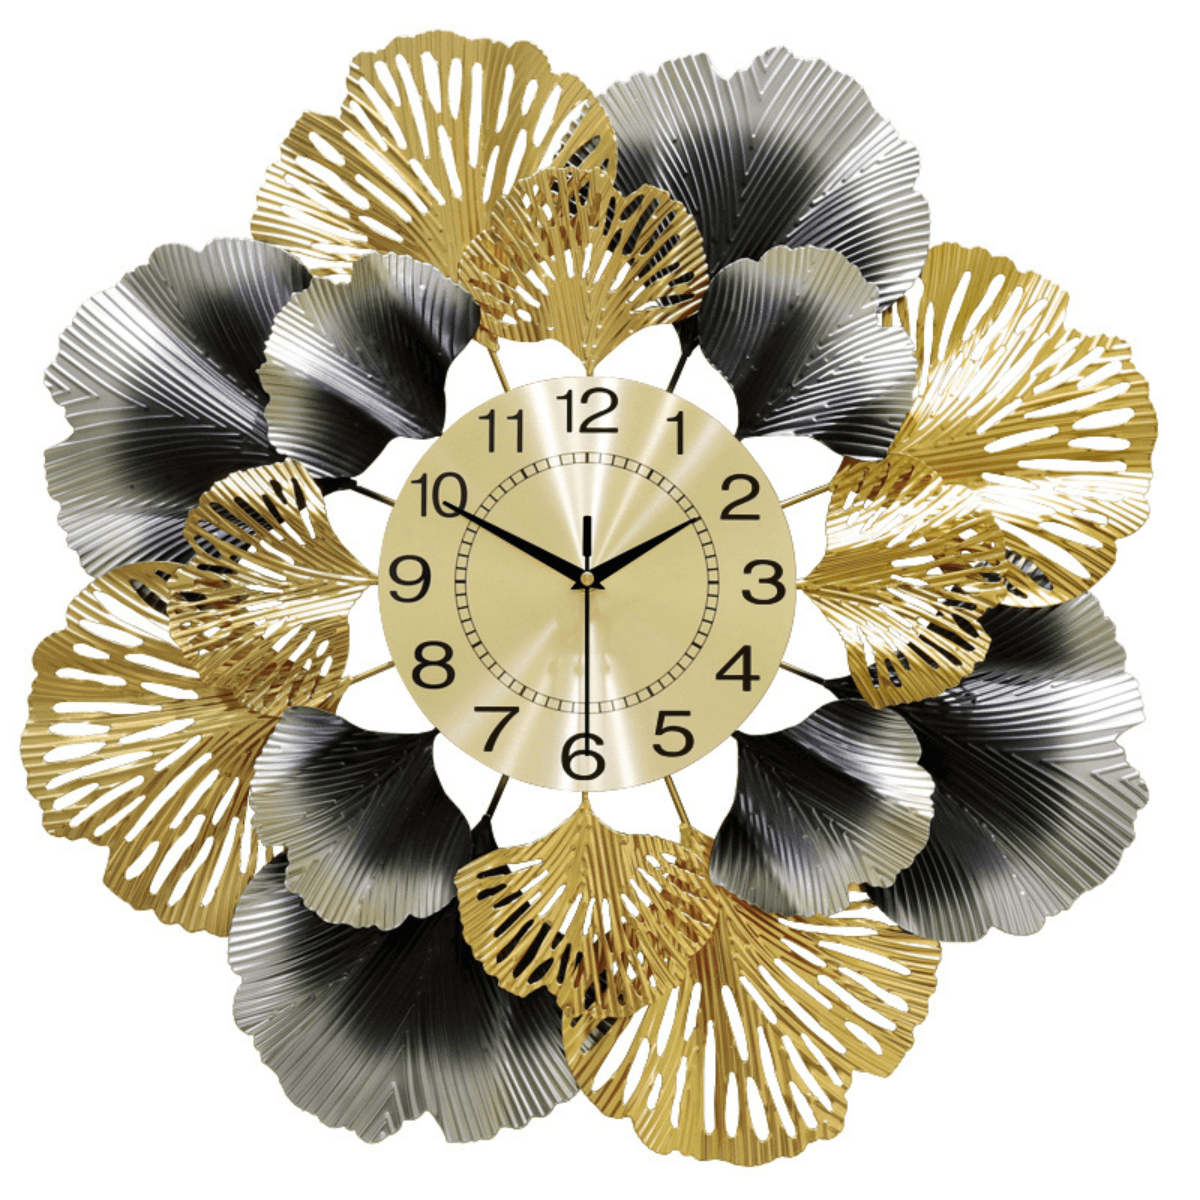 Black-and-Gold-Wall-Clock-in-Australia-5